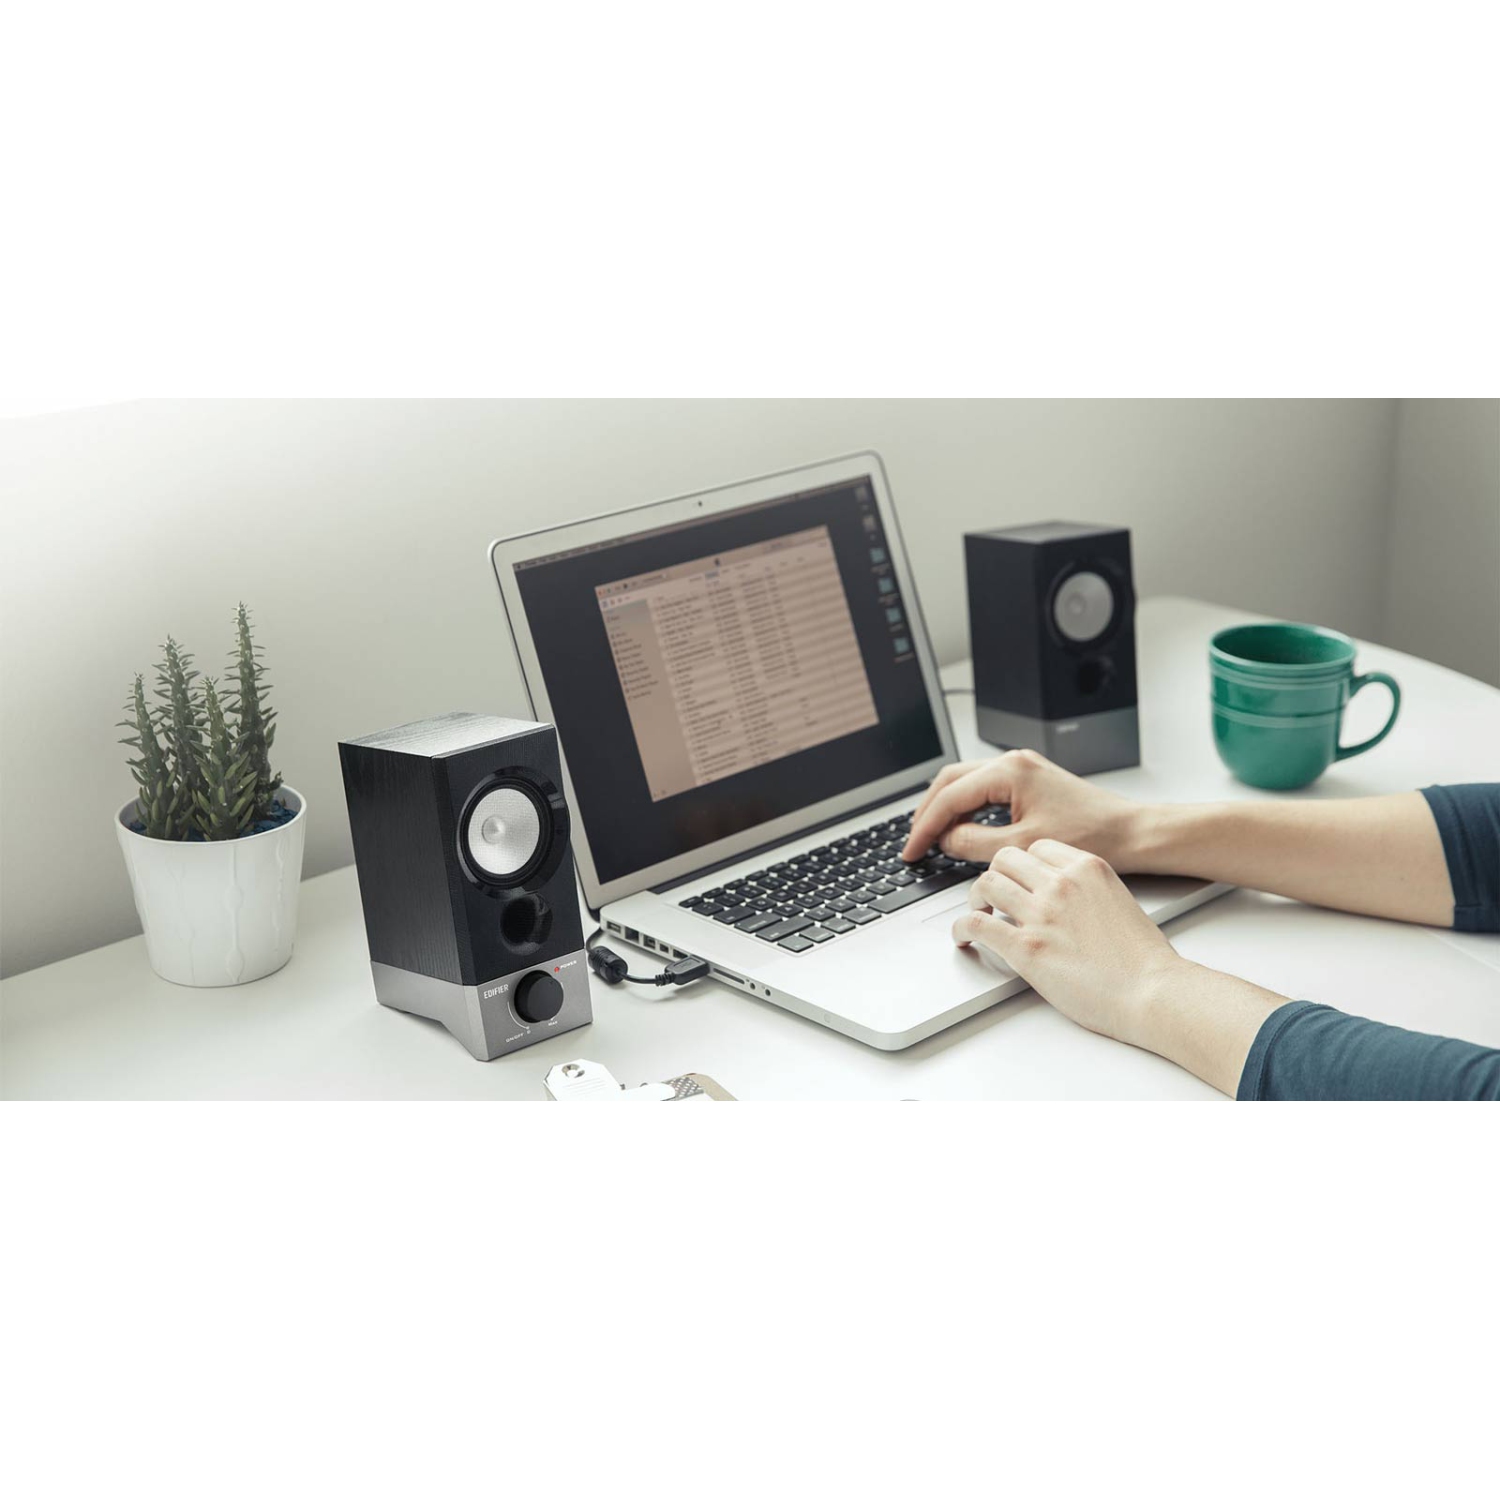 Edifier R19U Compact 2.0 Speakers Powered by USB Supports Windows 10 and Mac OS X 10.12 Sierra 